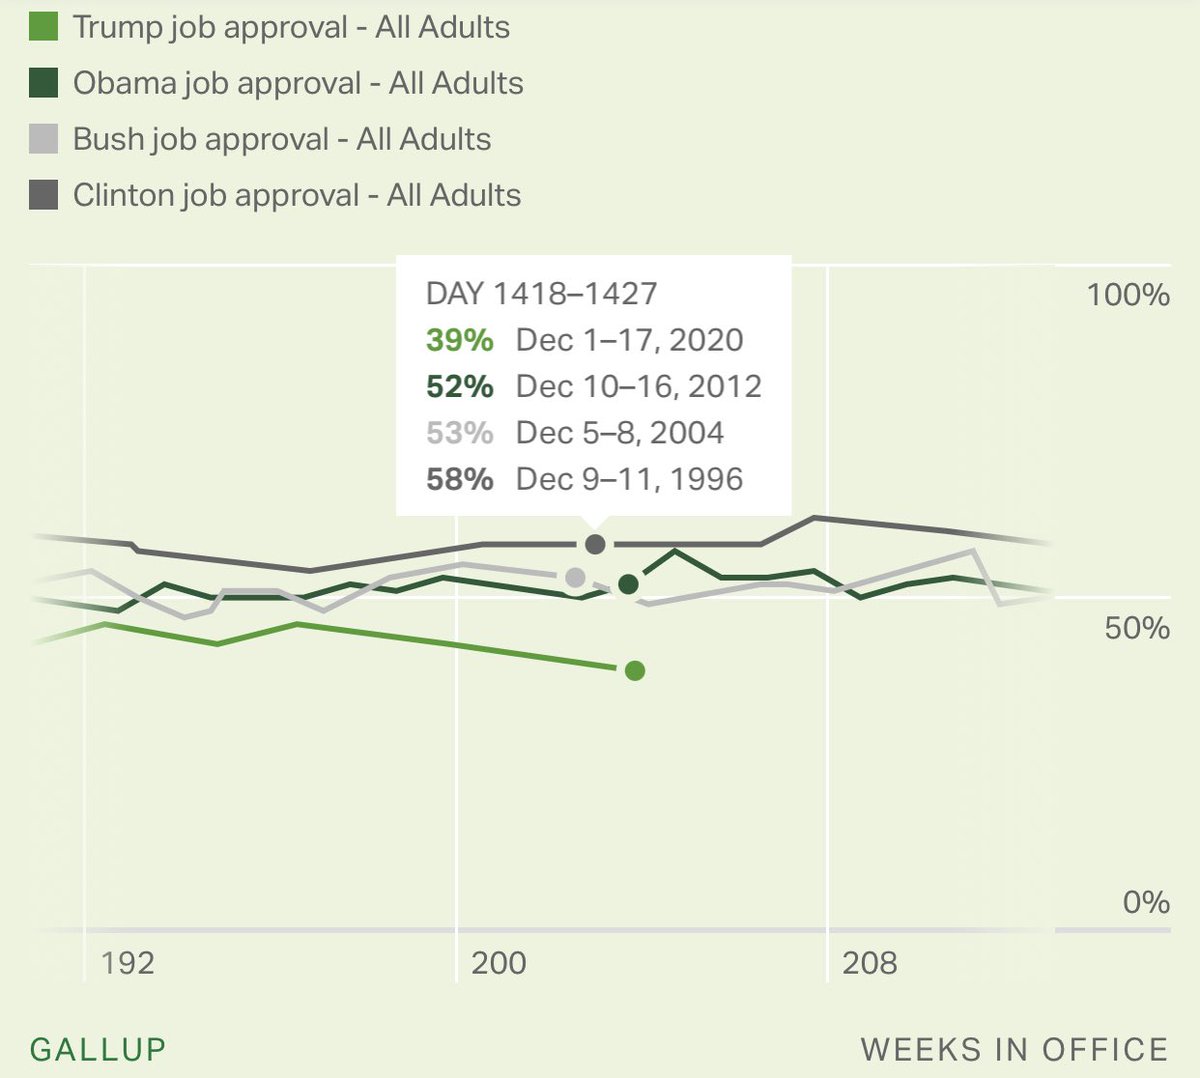 Just look how he compared to each of the previous 3 presidents at this point.He banked on the Electoral College being tilted enough in favor of red states to get him re-elected. Turns out that it’s not “get 39% approval rating POTUS re-elected” level tilted.